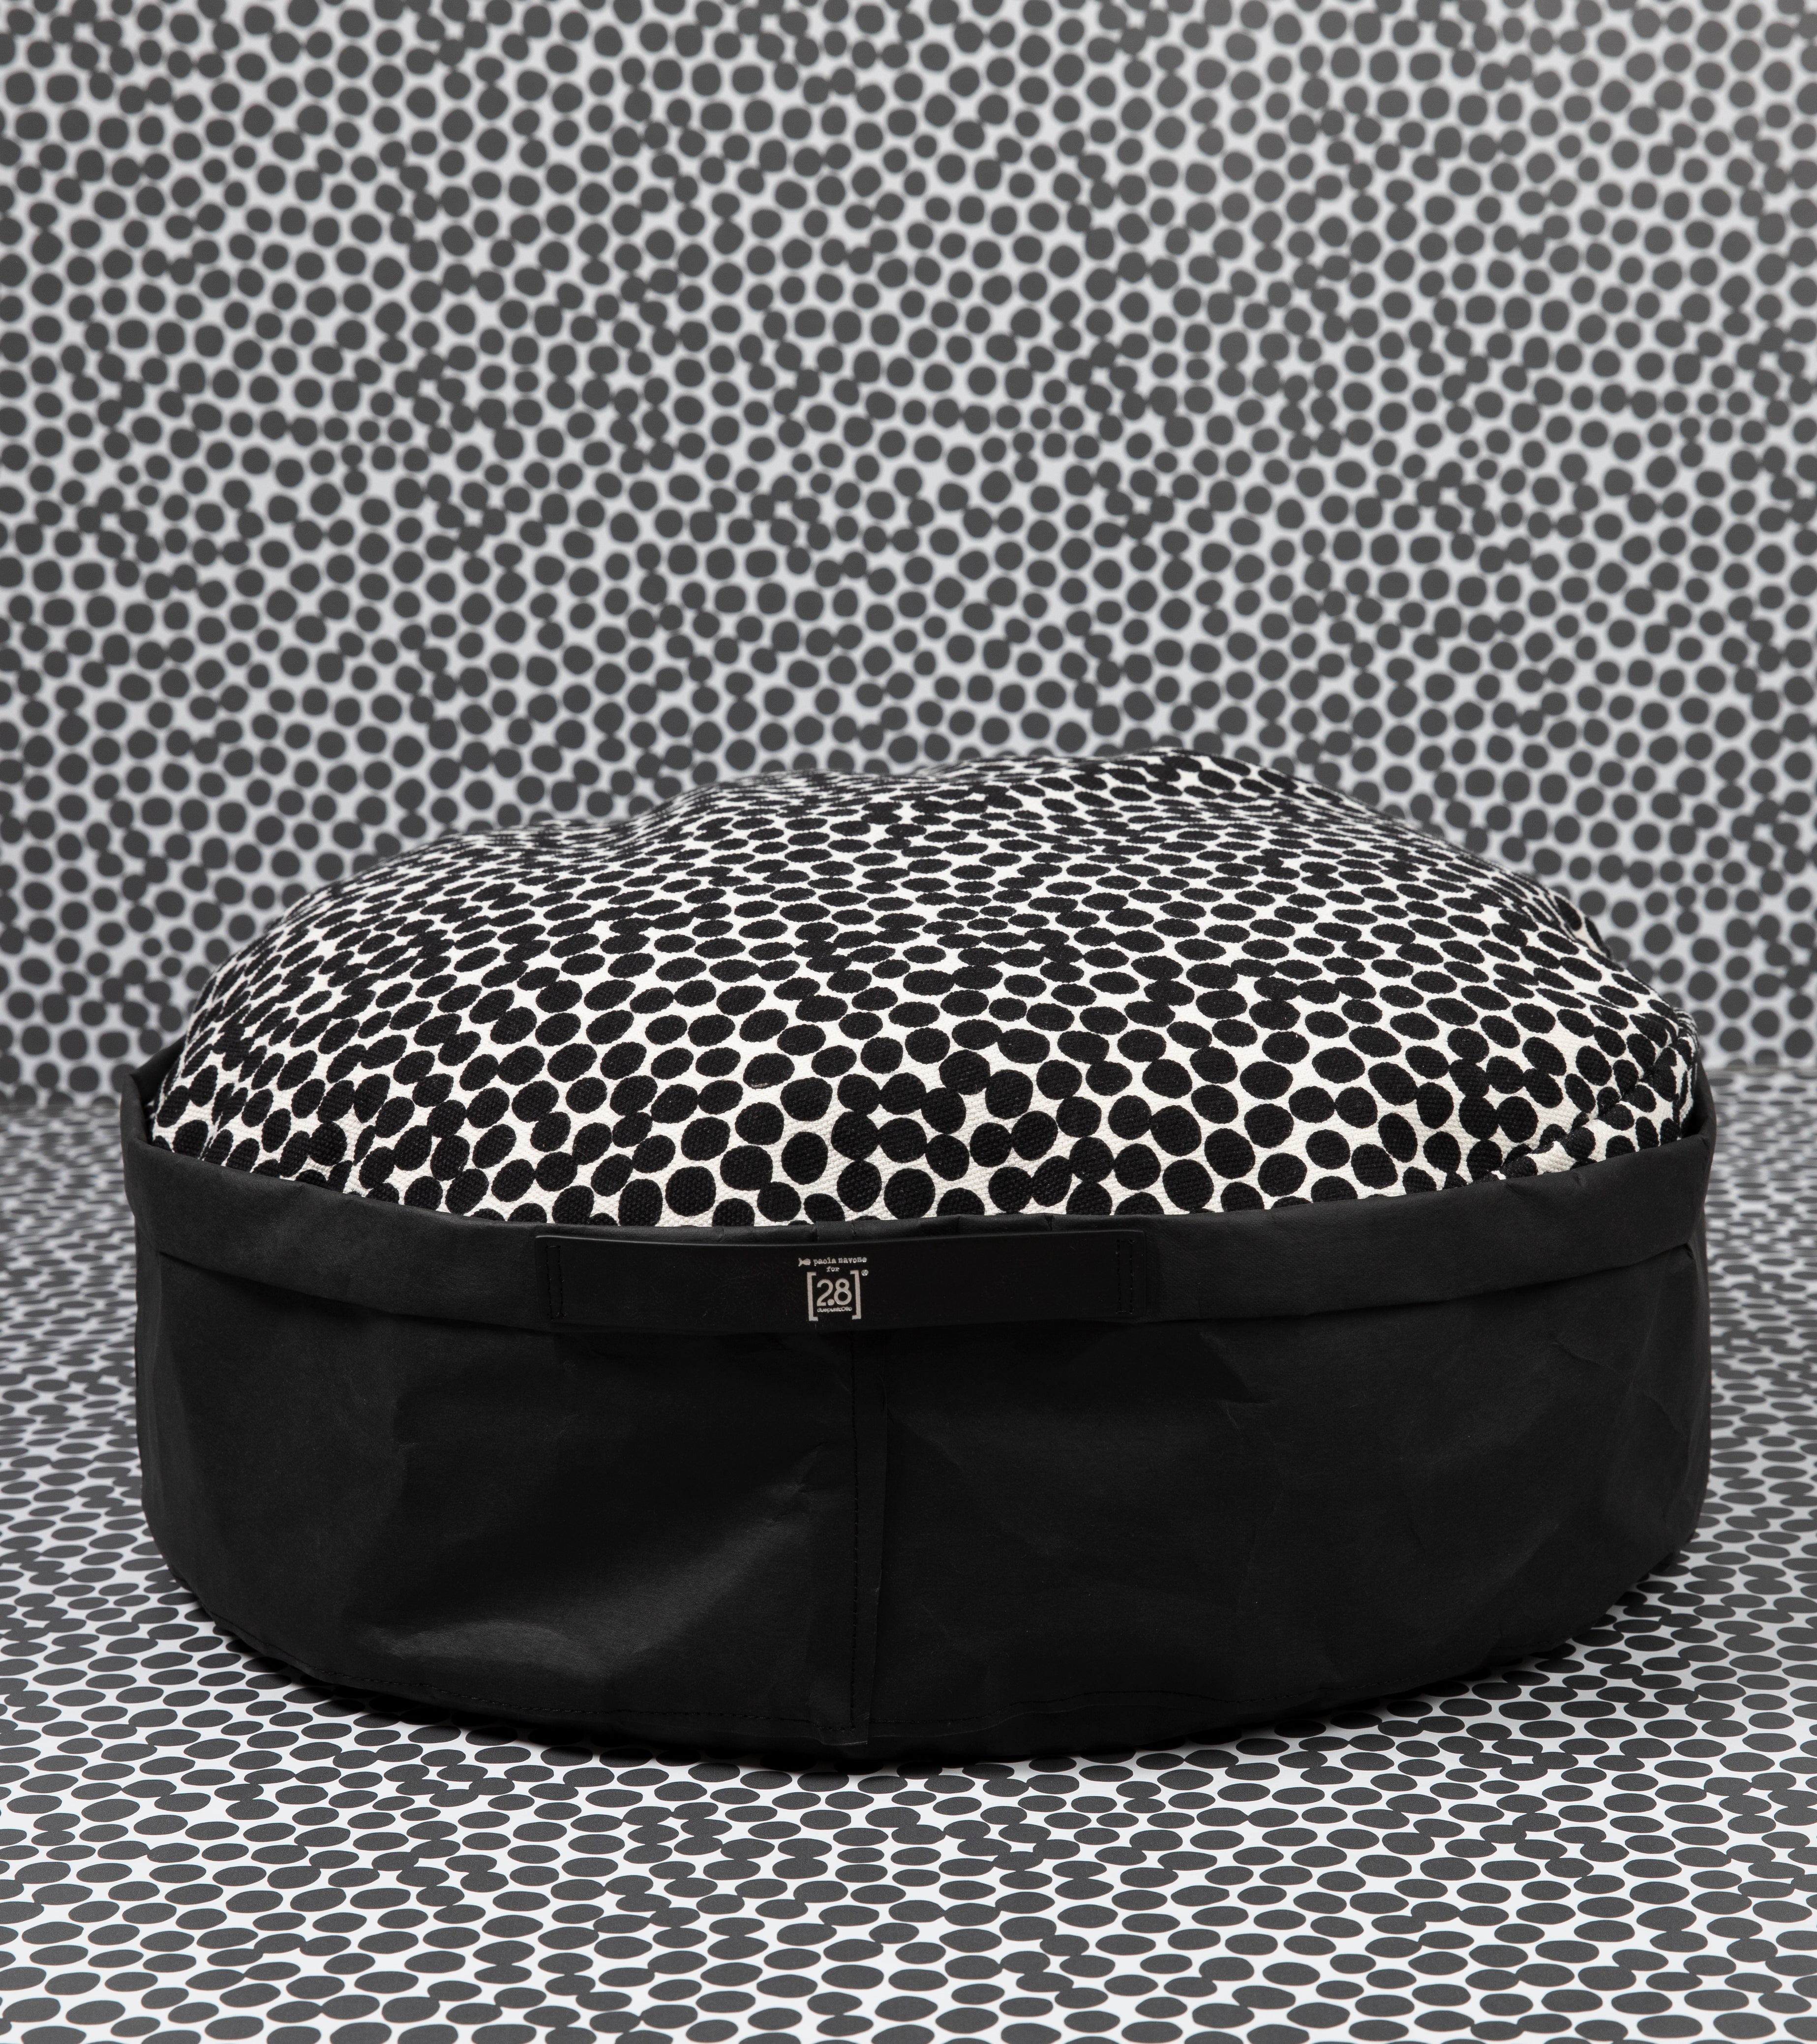 irving-dotto-collection-paola-navone-dogbed-33_eff2838f-b912-4407-811b-a218edad62de.jpg